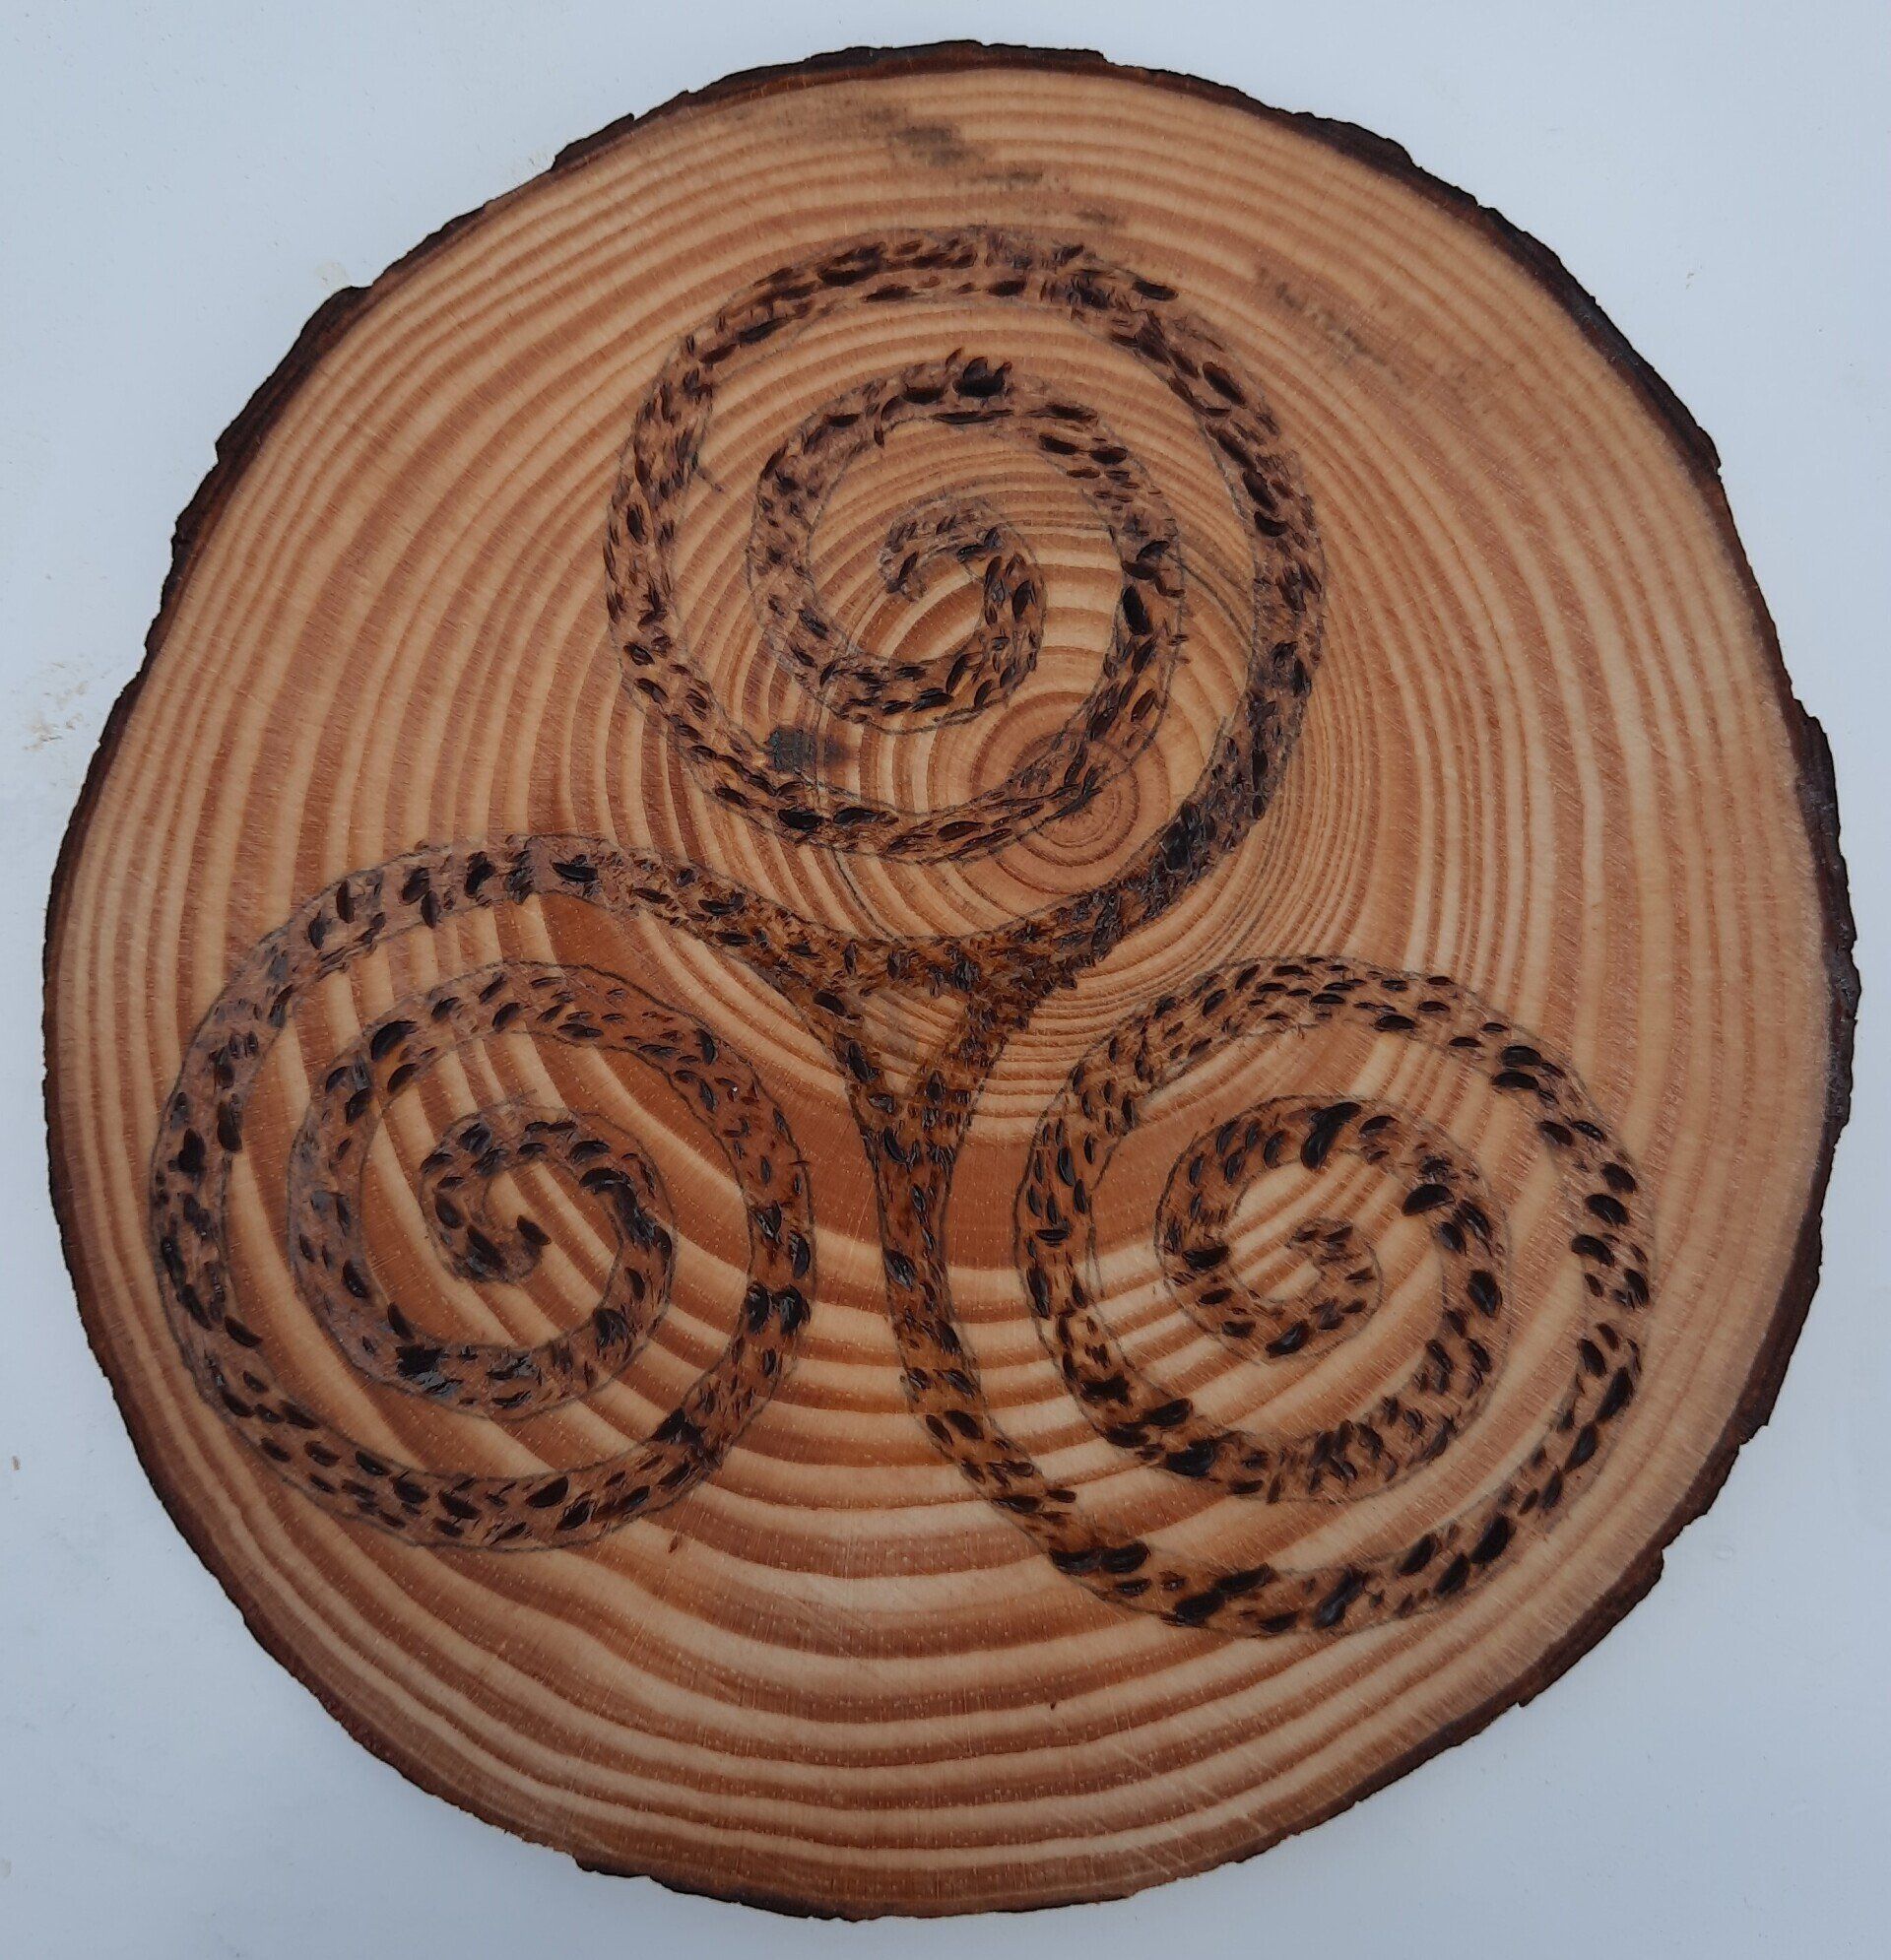 Stipled wooden coaster - helen's pyrography on wooden round